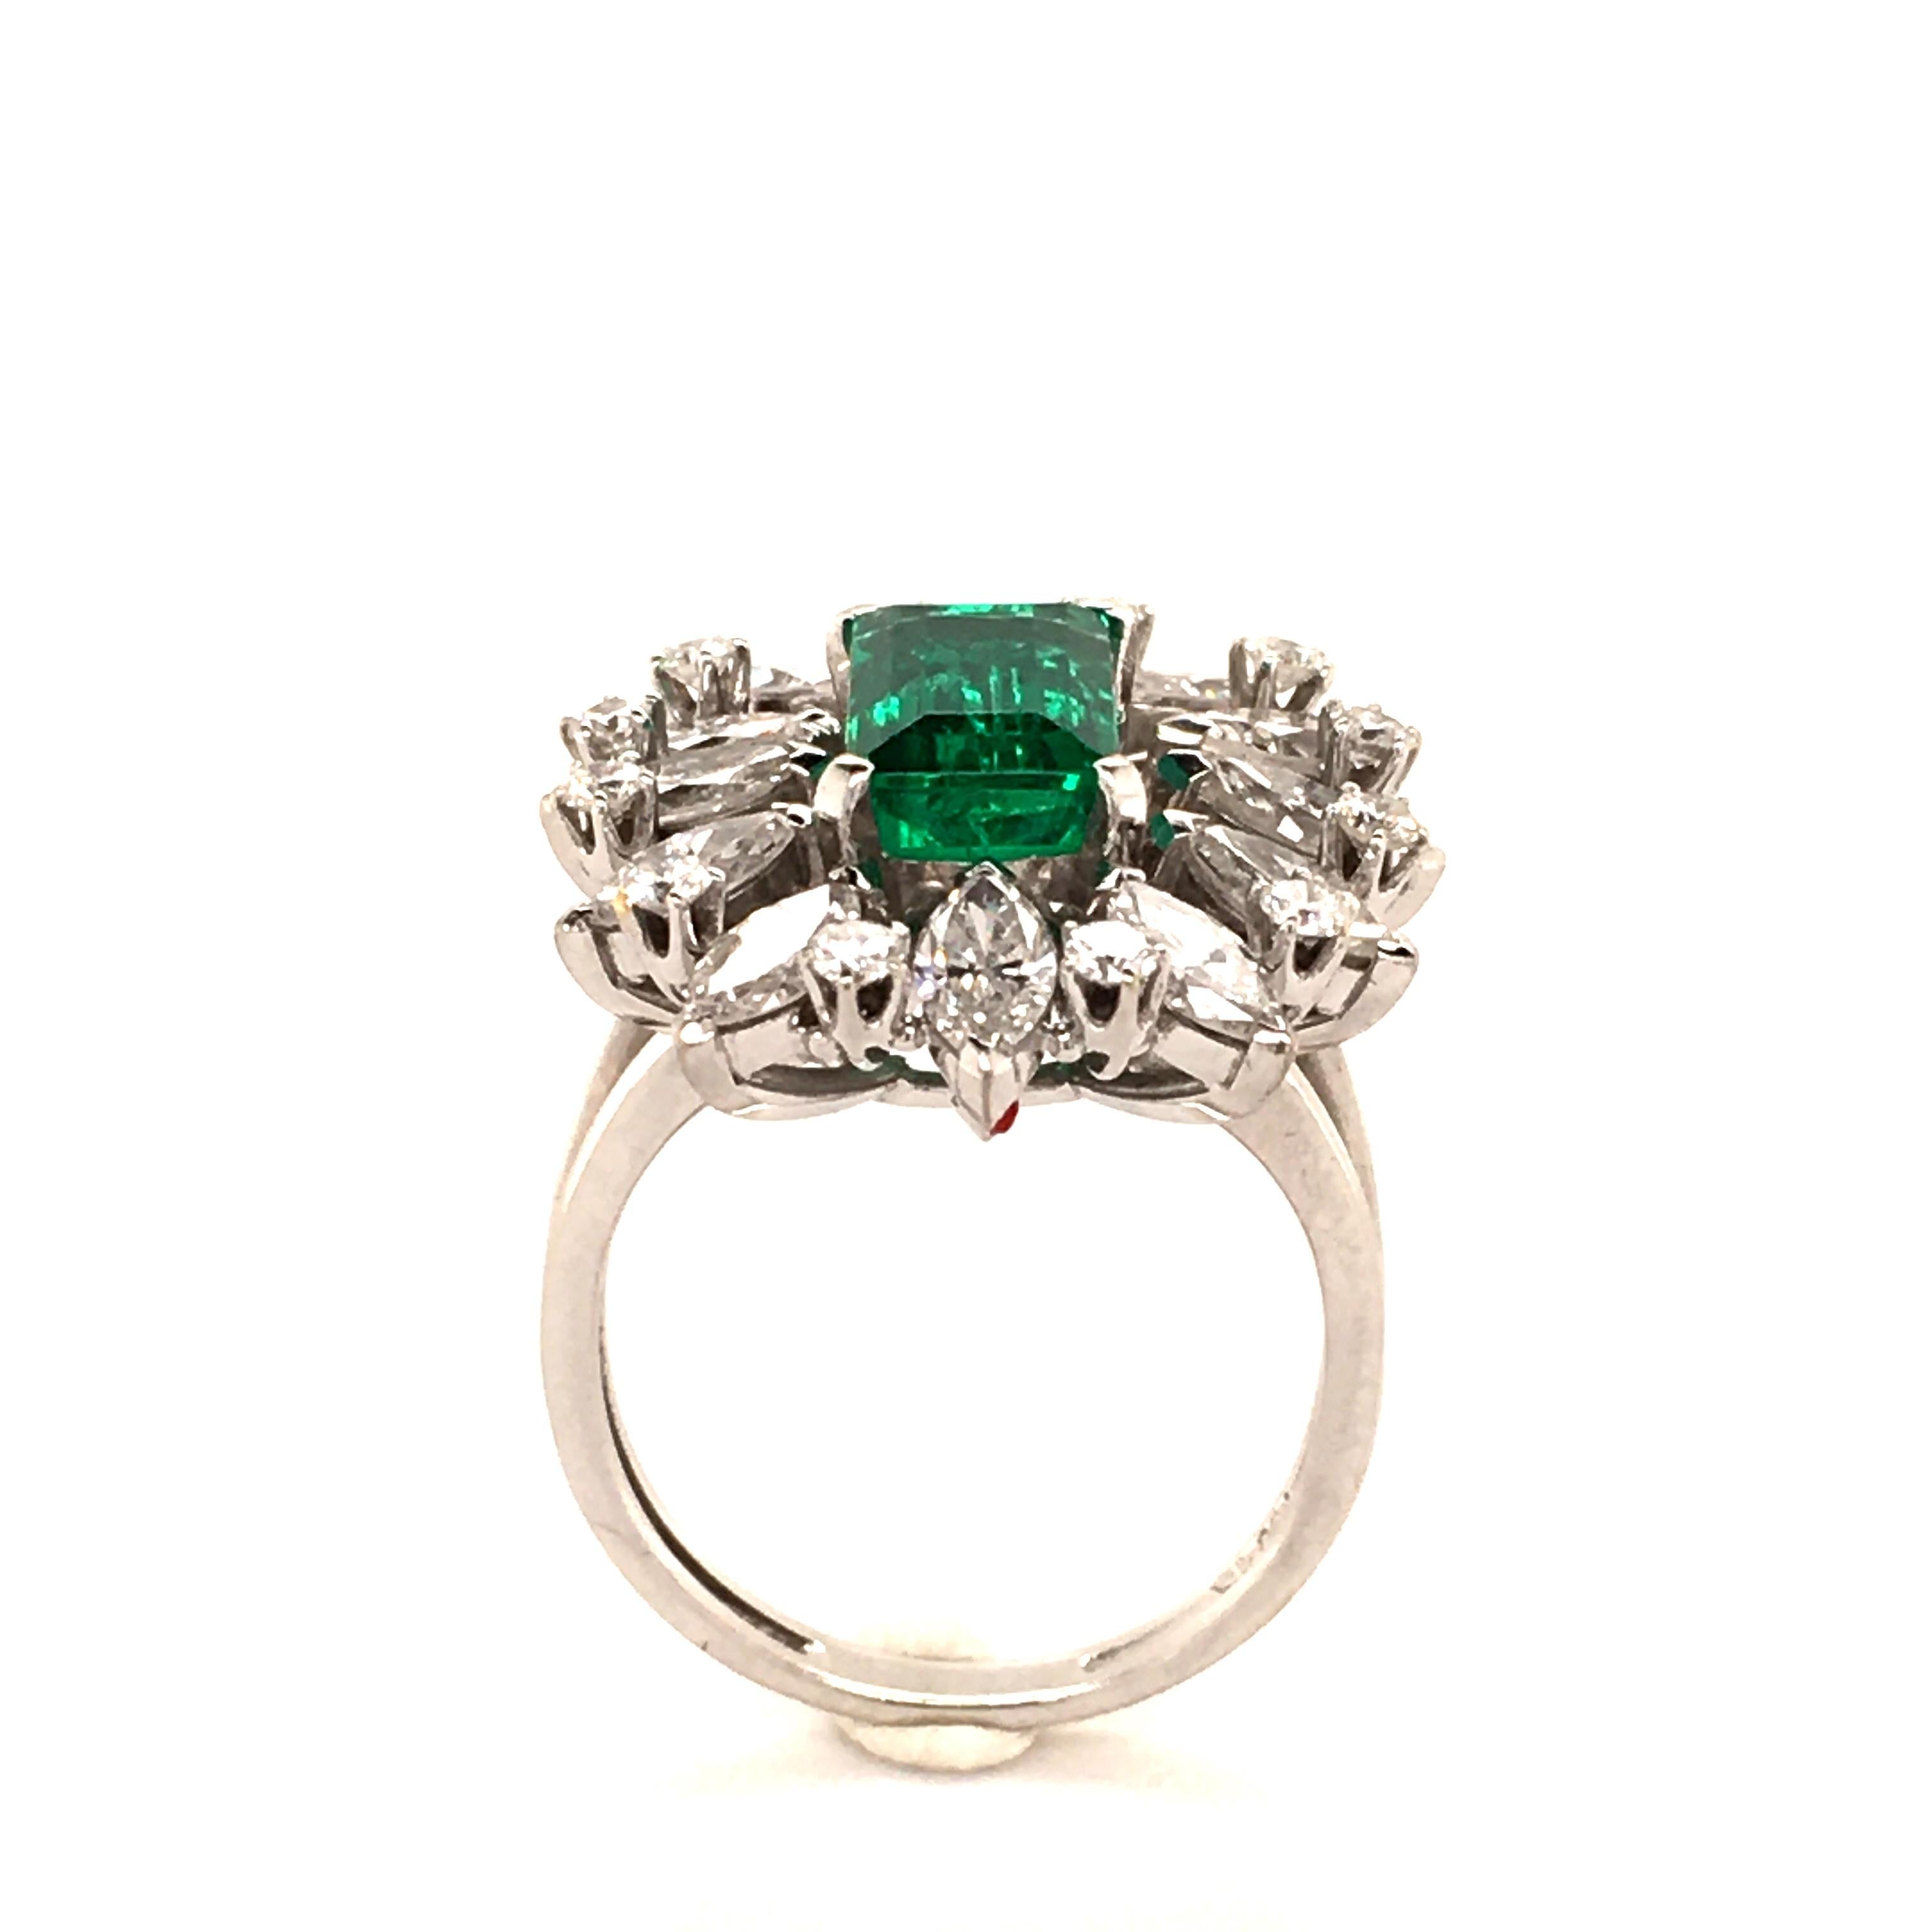 Women's or Men's 2.25 Carat Colombian Emerald and Diamond Ring in 18 Karat White Gold